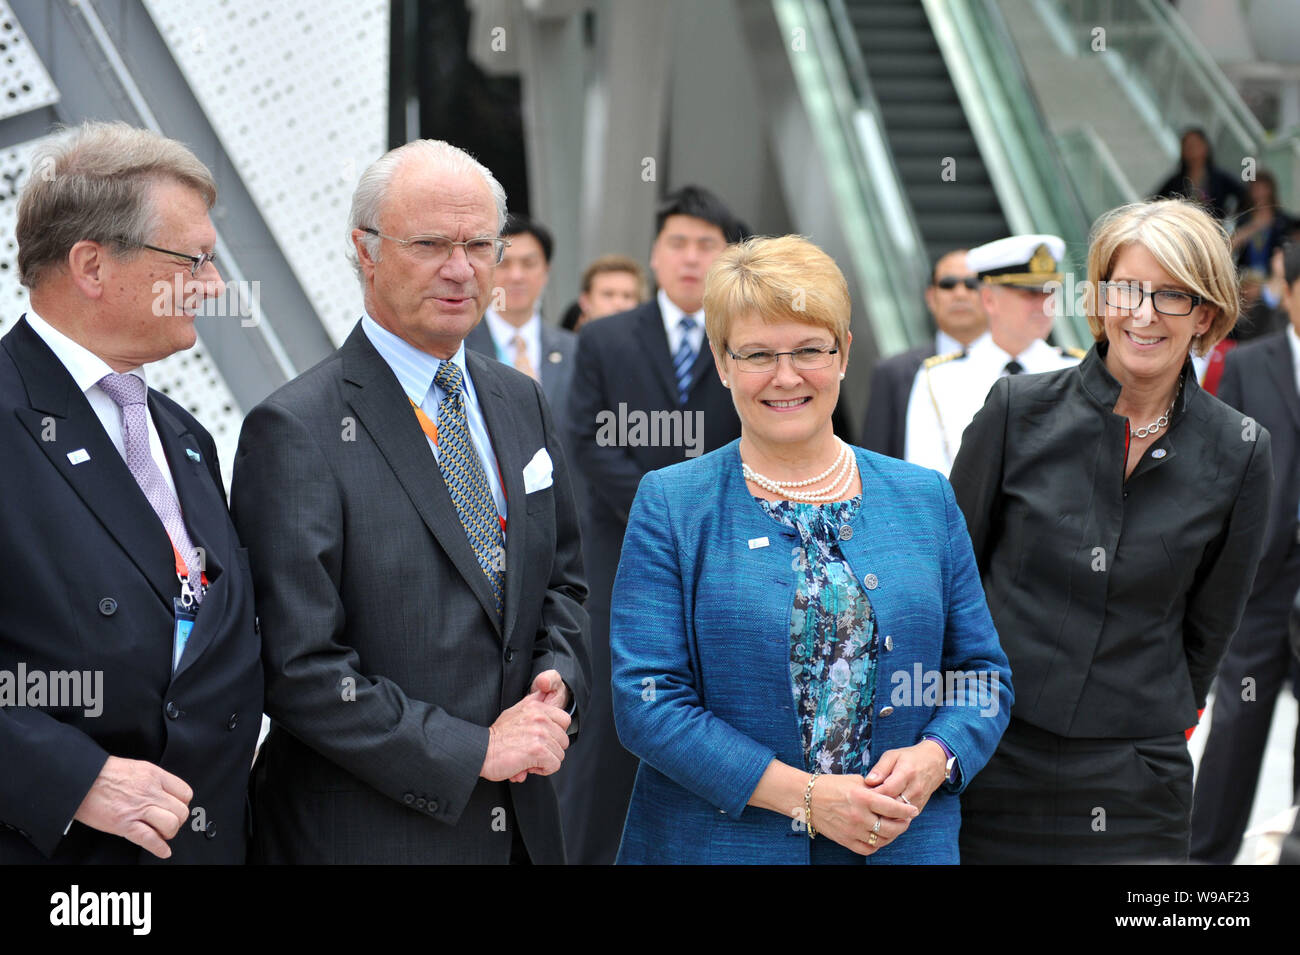 Swedish King Carl XVI Gustaf (L2), Swedish Deputy Prime Minister Maud Olofsson (R2) and followers visit the Sweden Pavilion in the Expo site in Shangh Stock Photo